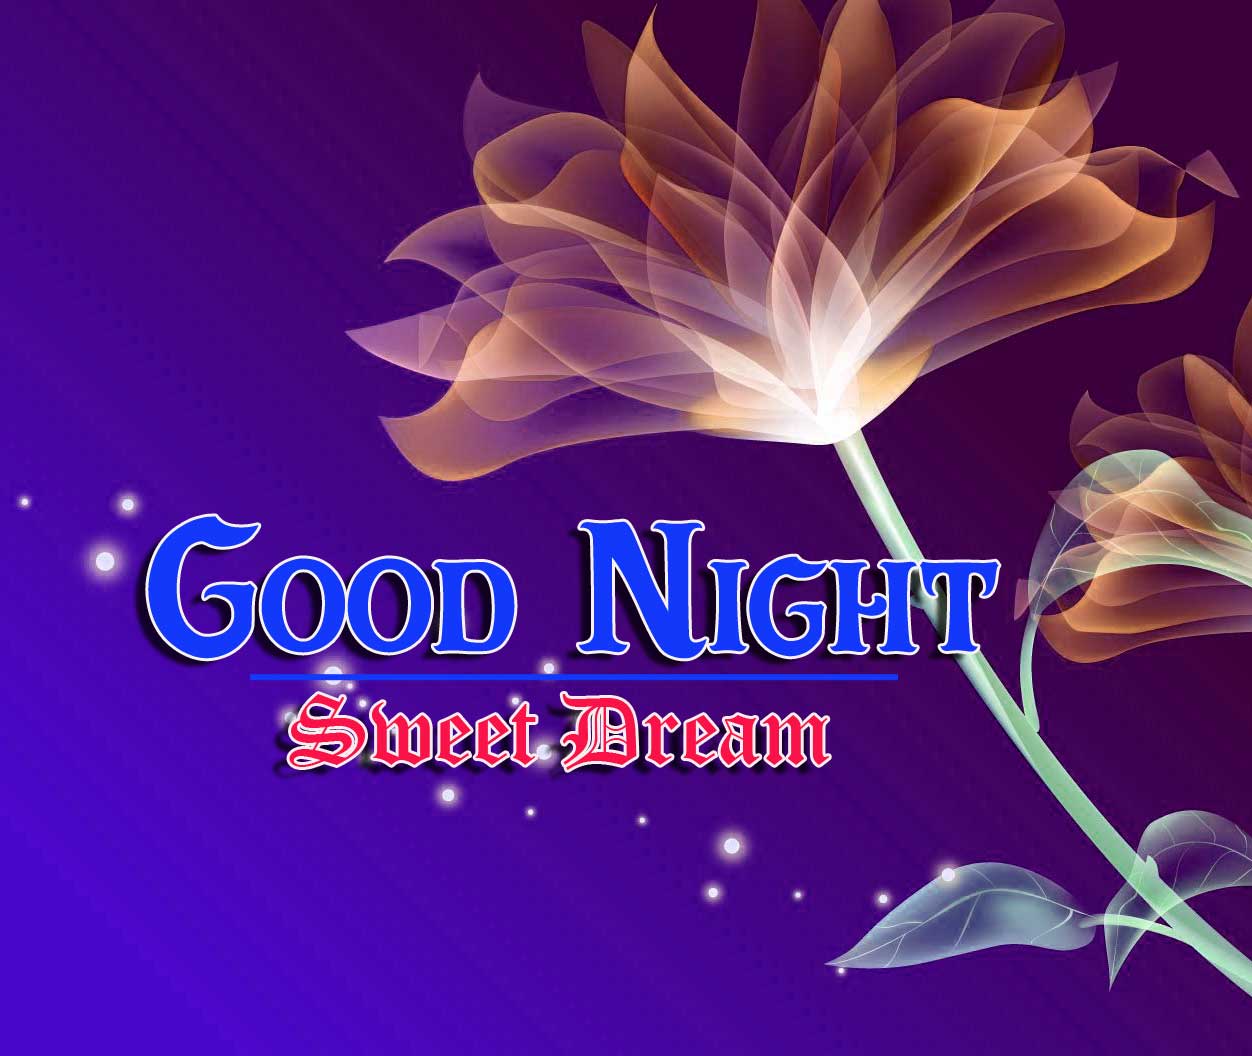 Good Night Wishes Images Wallpaper pics Download 